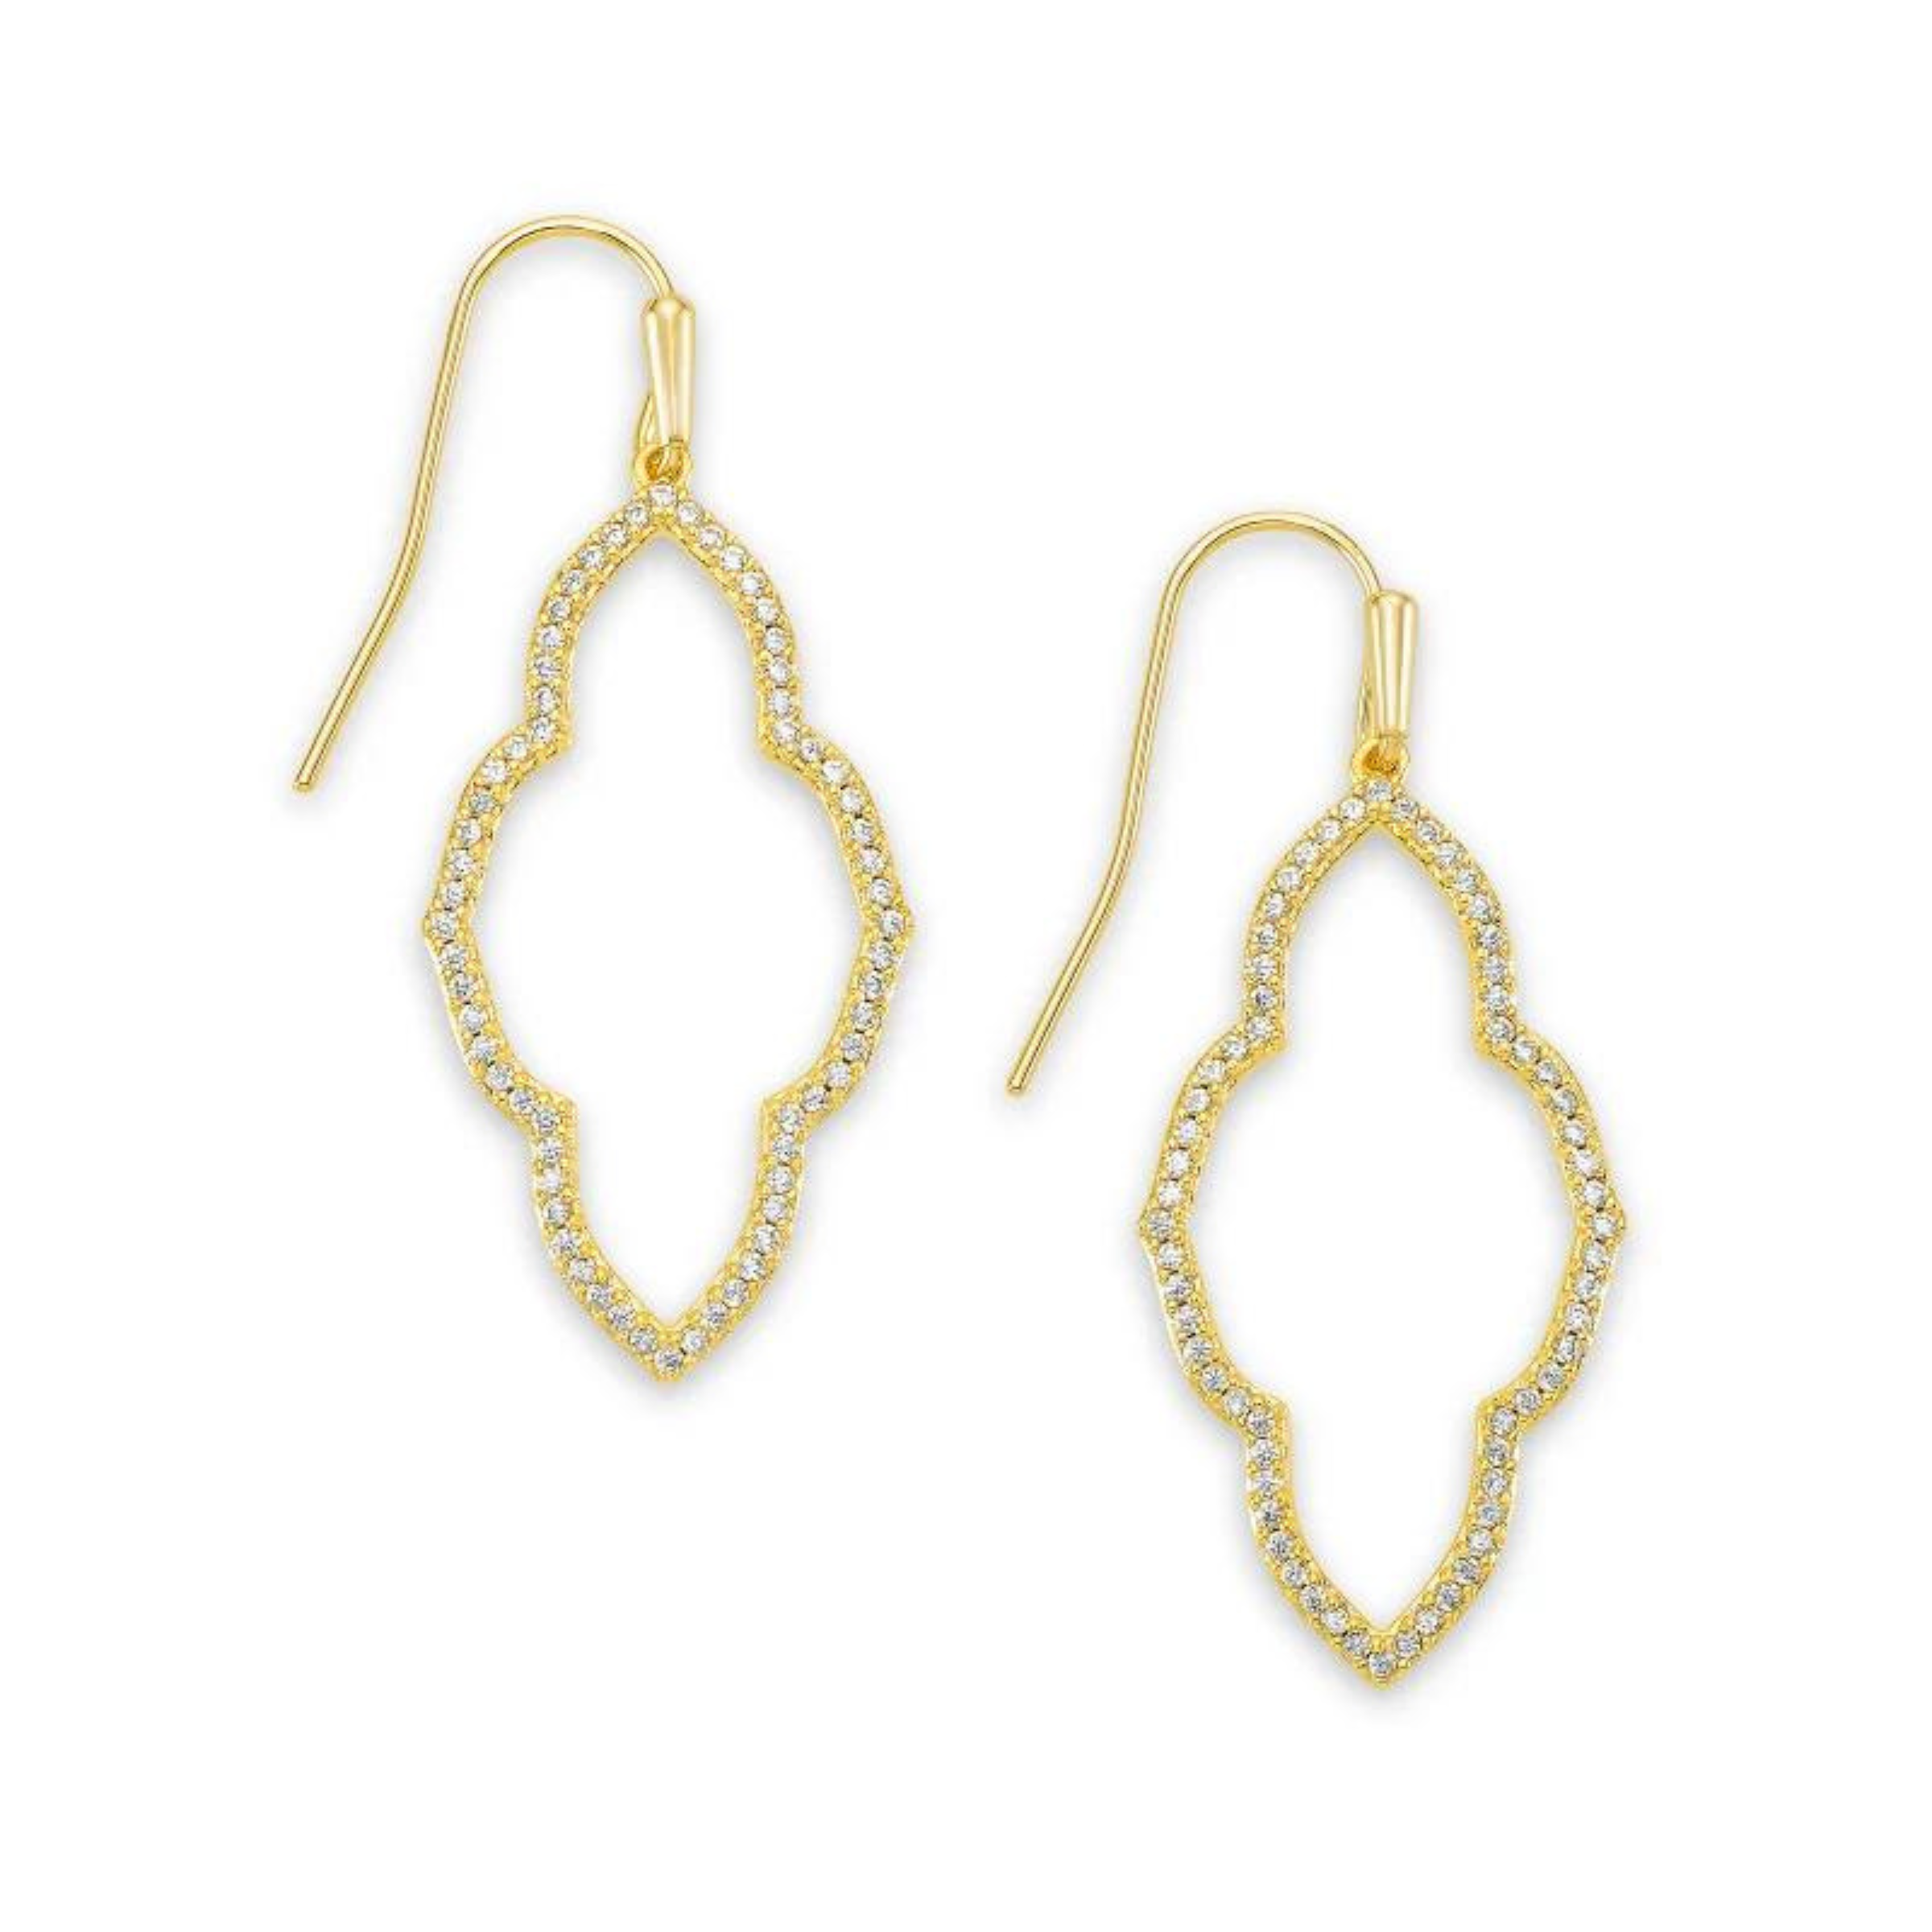 Kendra Scott | Abbie Gold Small Open Frame Earrings in White Crystal - Giddy Up Glamour Boutique